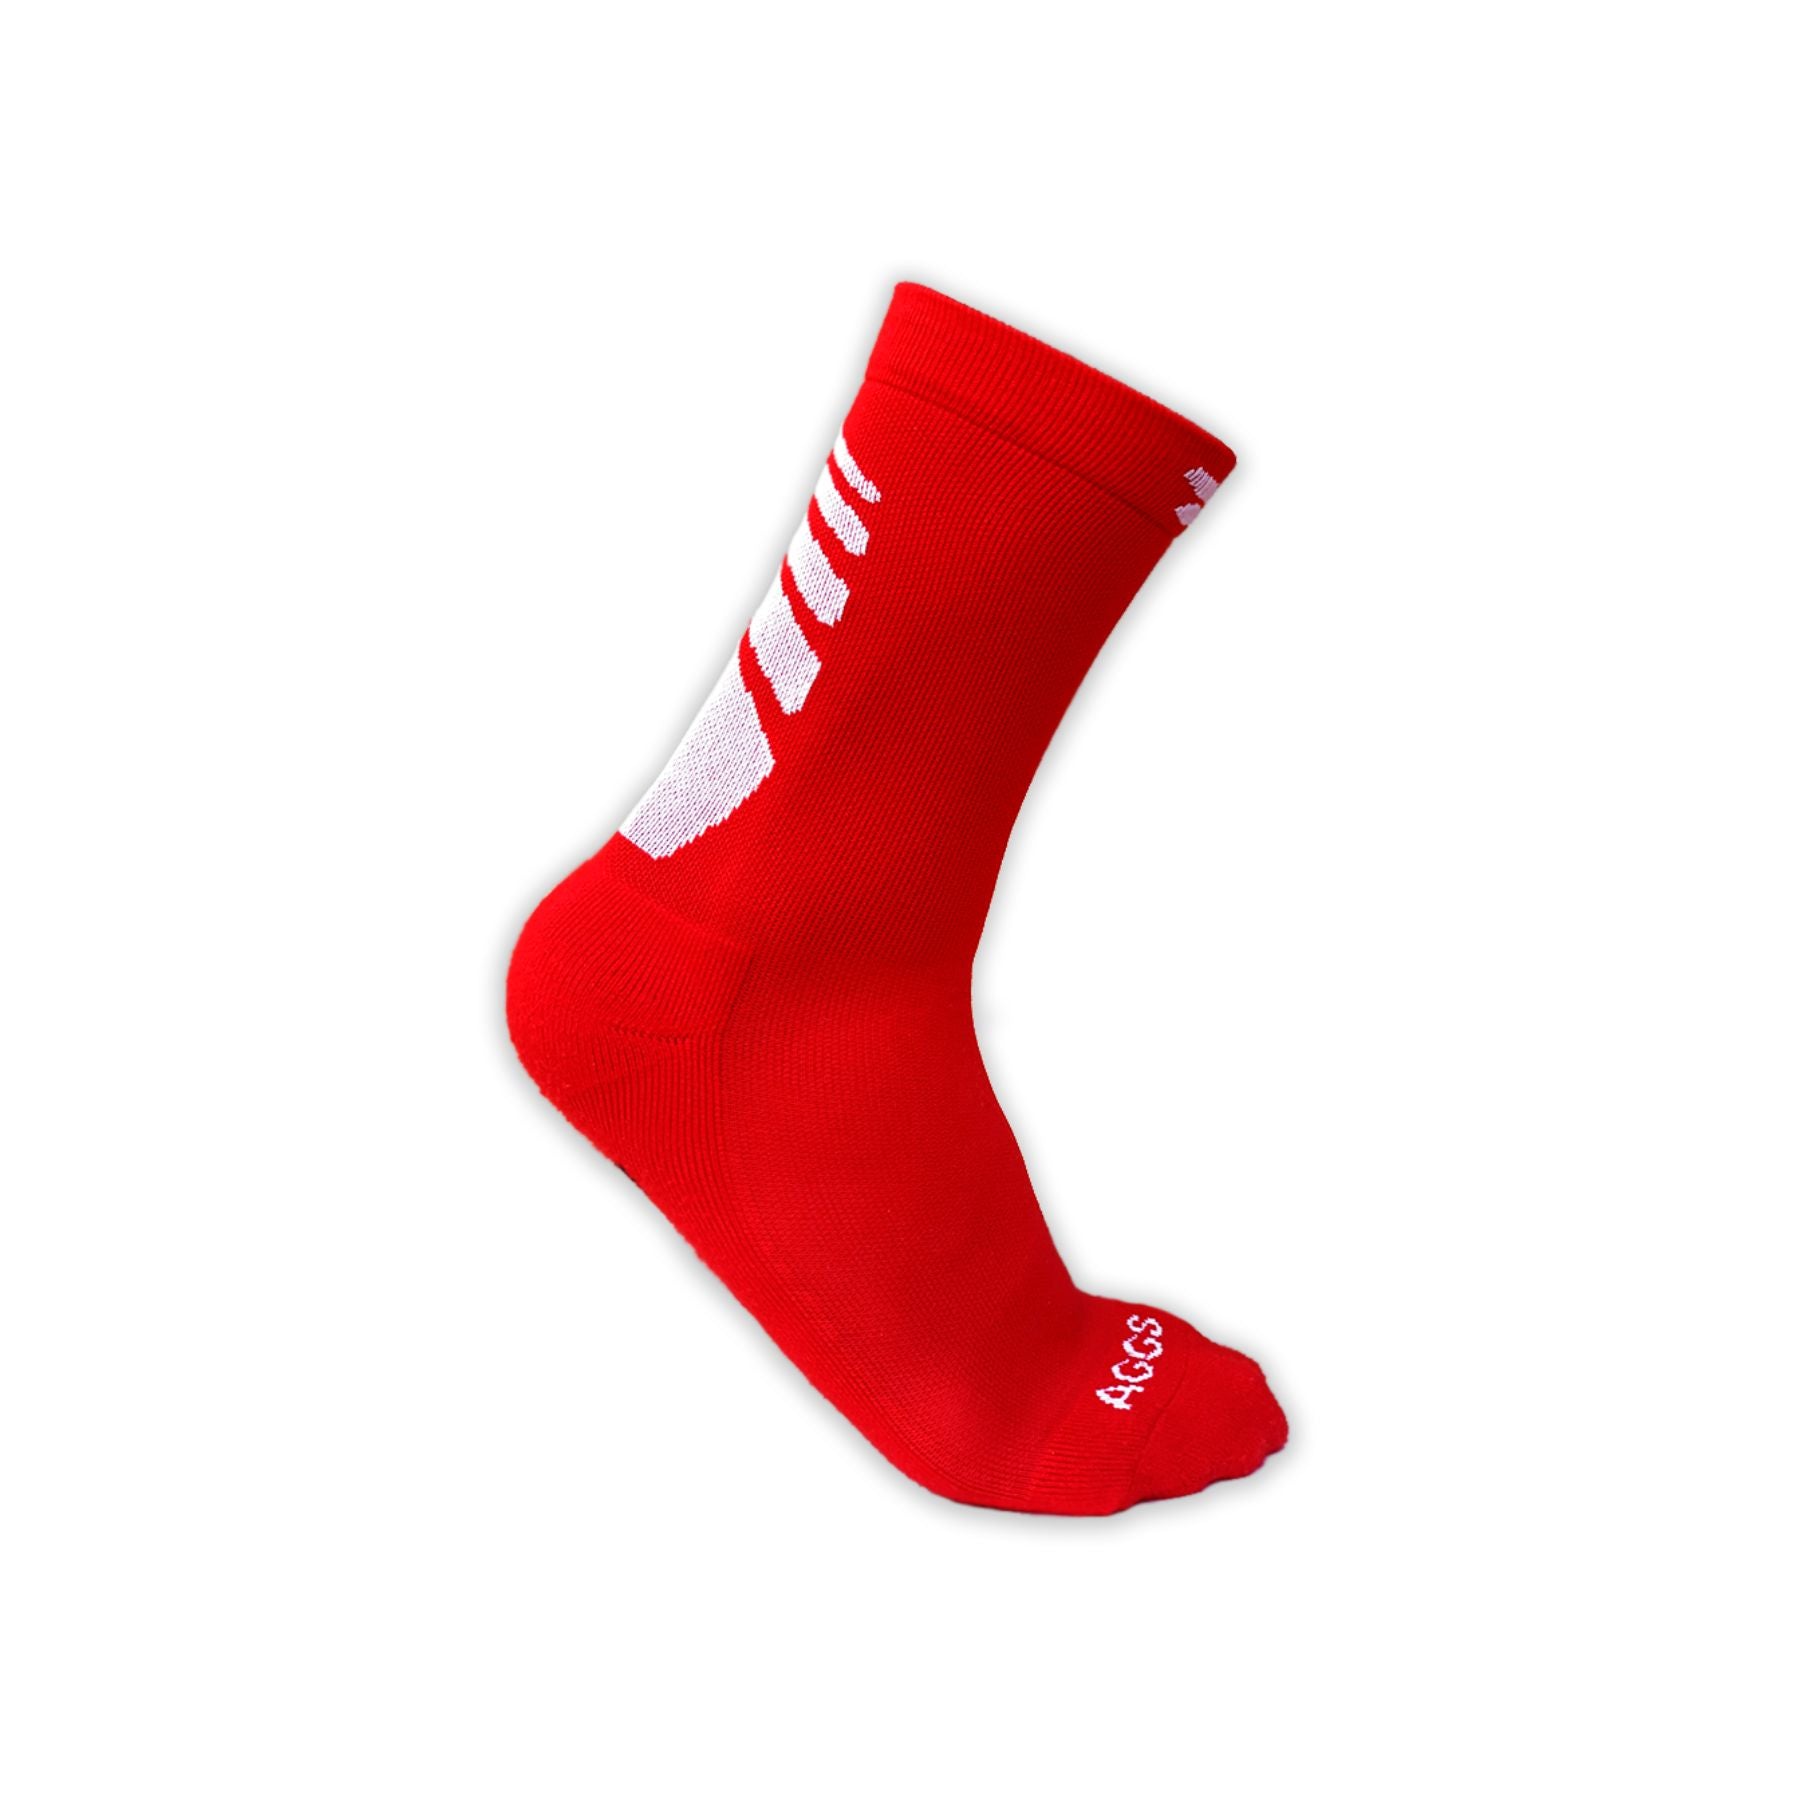 AGGS GRIPSOCK ROSSO